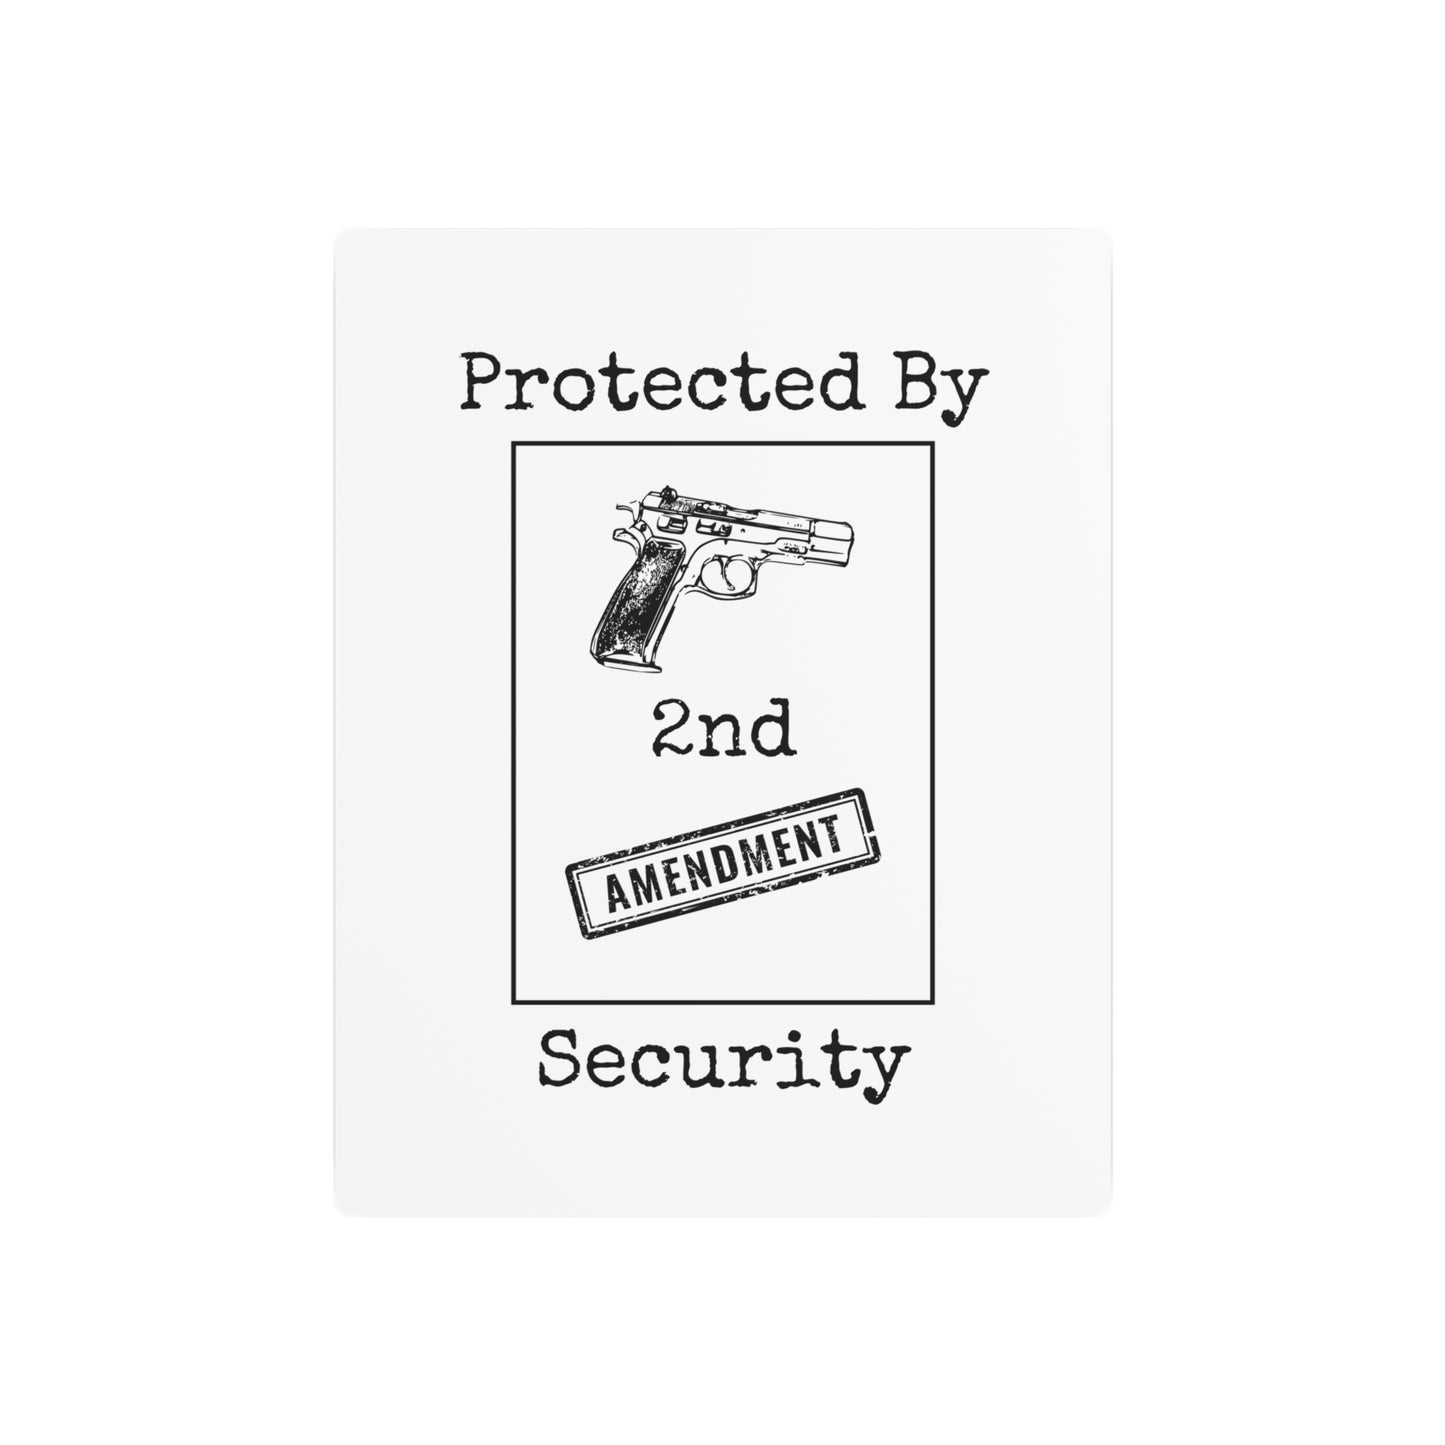 Durable metal sign supporting gun ownership rights